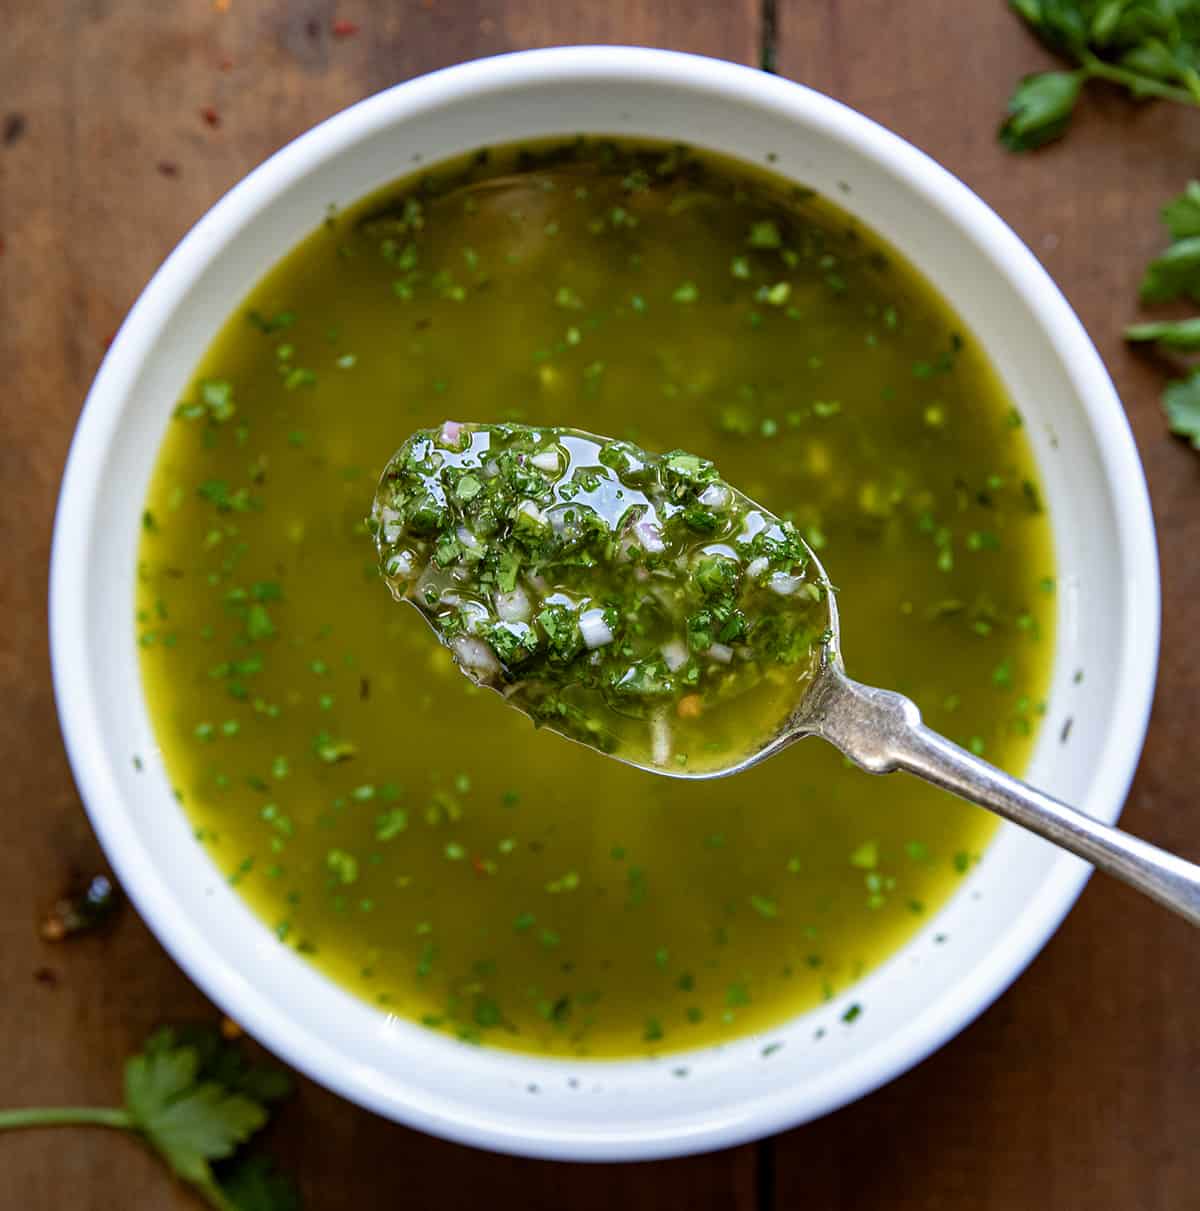 Bowl of Chimichurri Sauce with a spoonful.